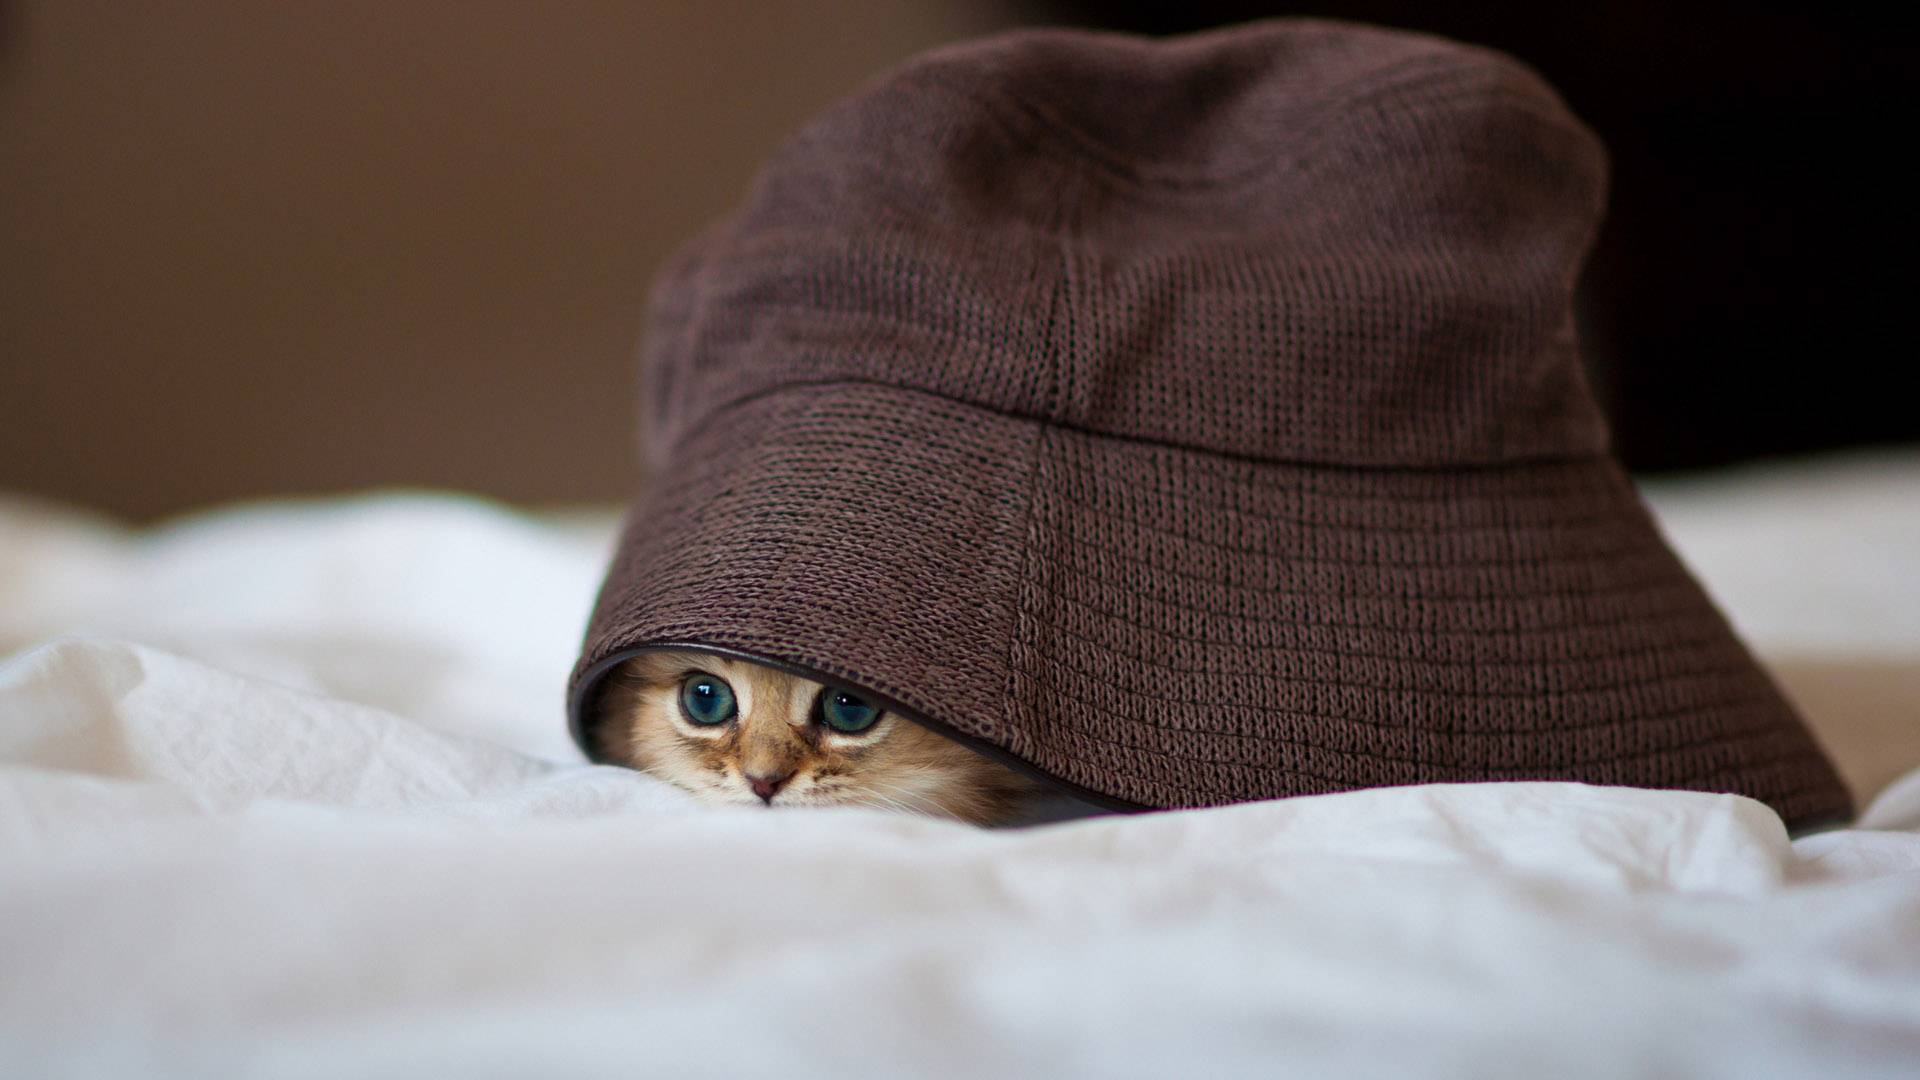 How To Coax Out a Cat That is Always Hiding